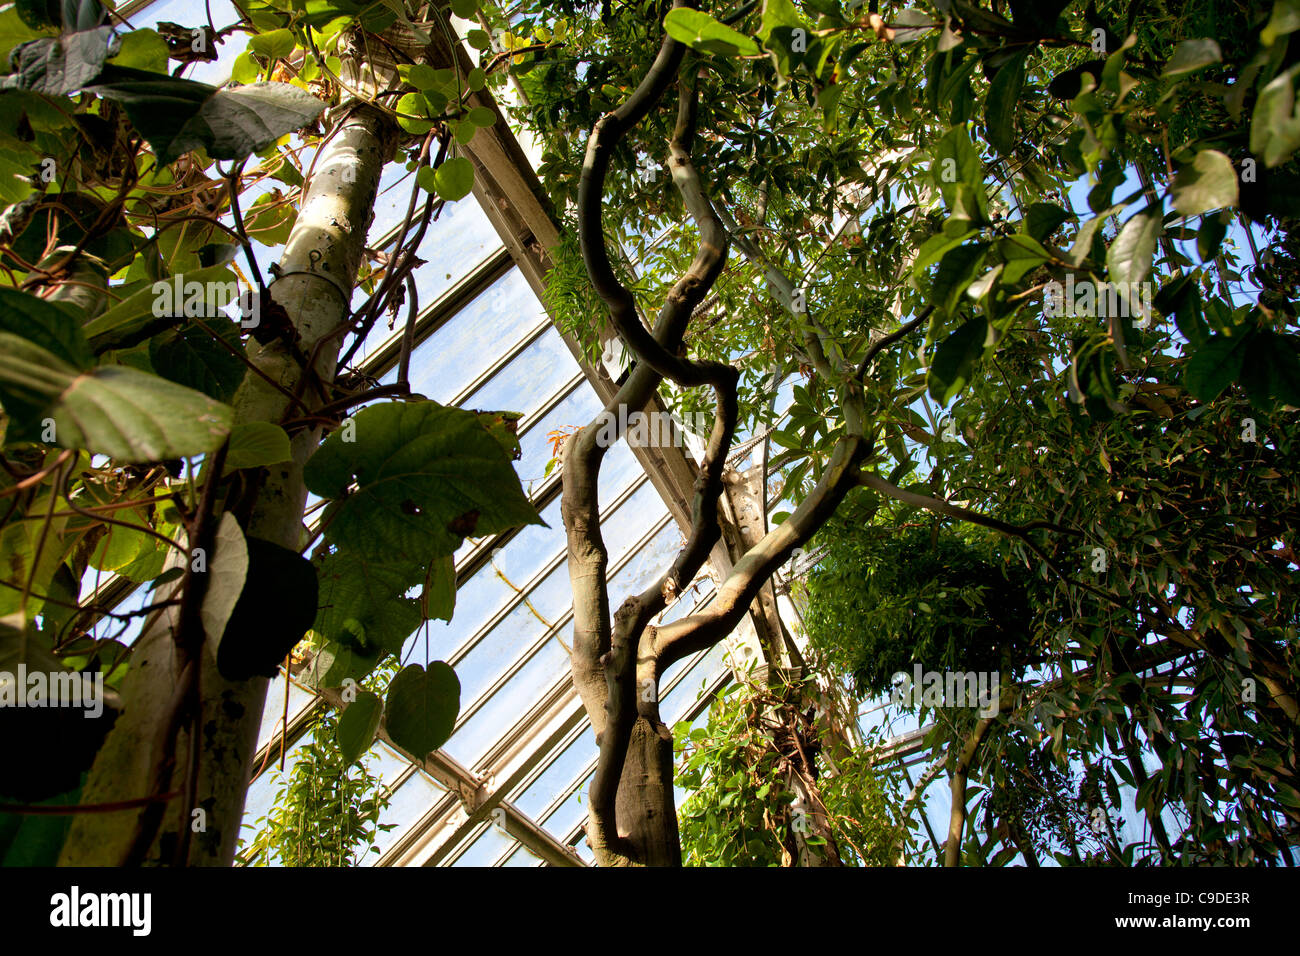 Inside Temperate House Greenhouse at Kew Gardens in London Stock Photo